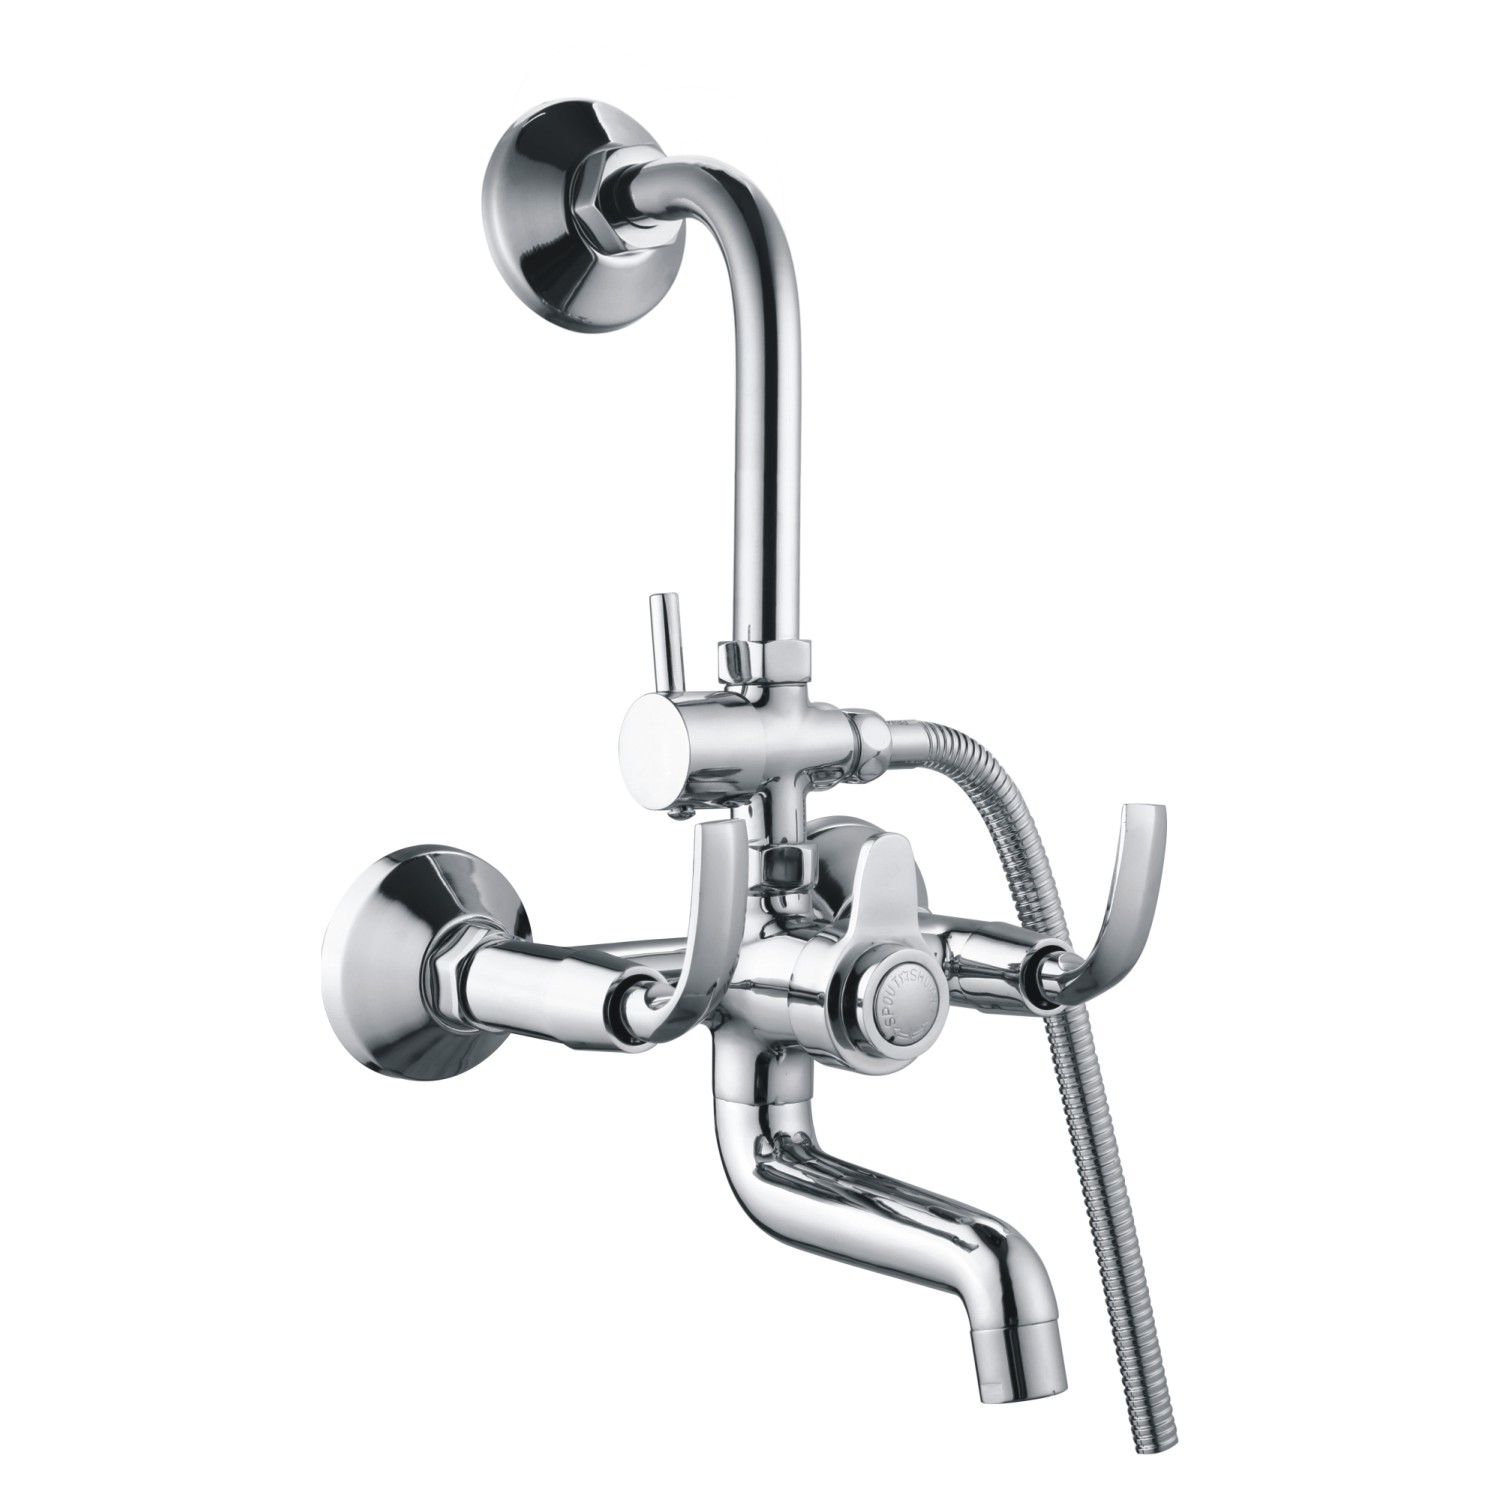 C.P WALL MIXER 3 IN 1 SYSTEM WITH BEND SET TELEPHONIC SHOWER & 1.5 MTR. TUBE WITH STAND 